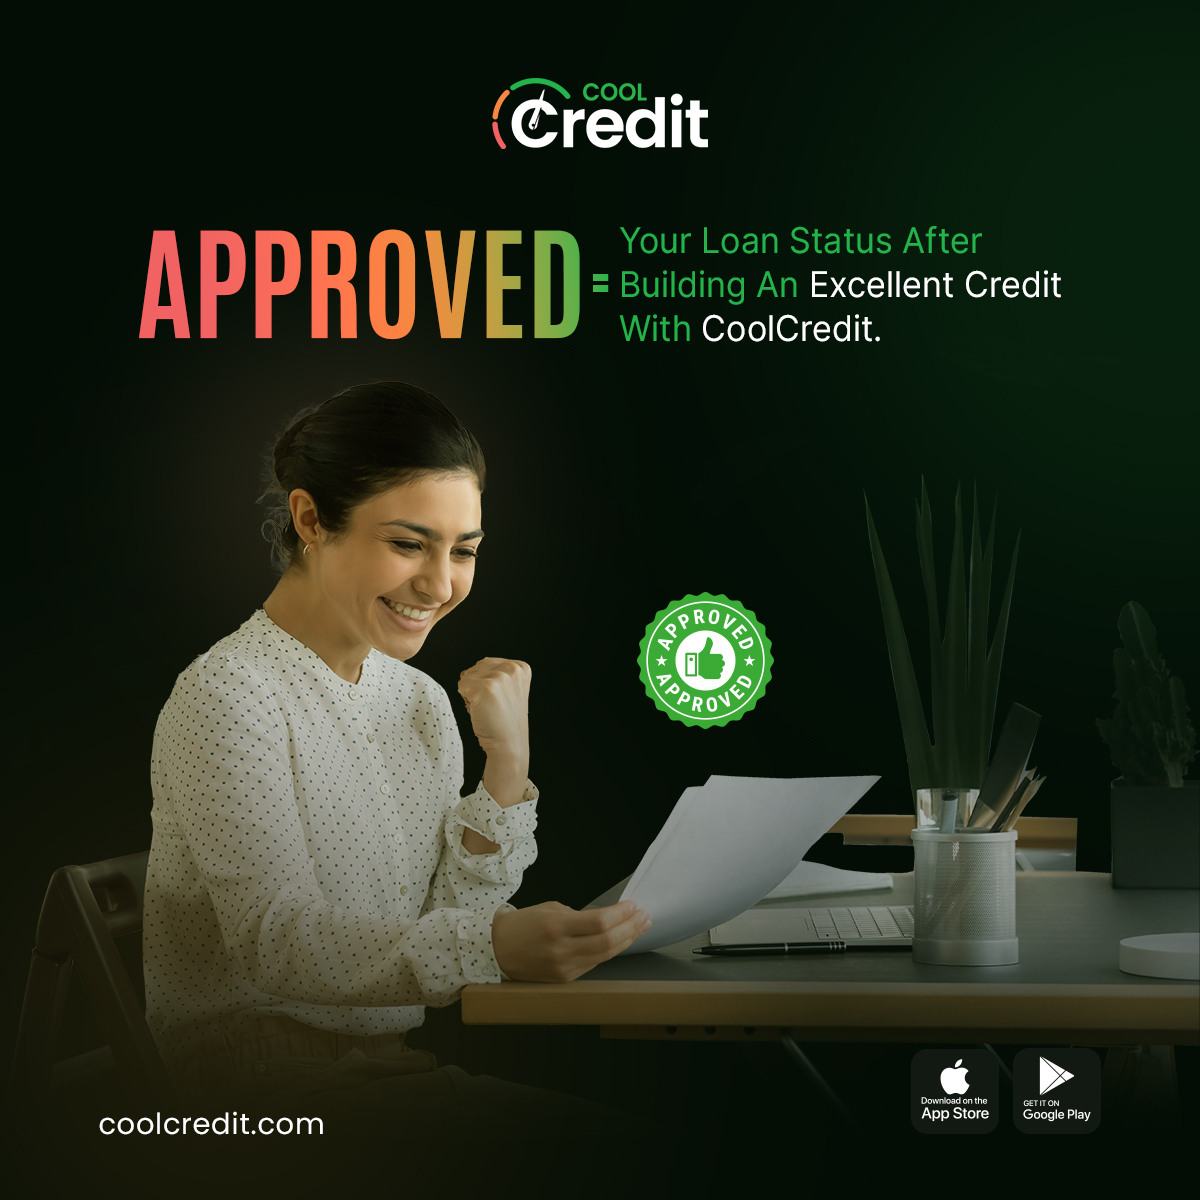 Having an excellent #creditscore makes it easier to get approved for #loans because it means you're seen as less risky to lenders. This translates into lower #interestrates, higher loan amounts, faster approval, better terms, and more. Download the #CoolCreditApp for more!